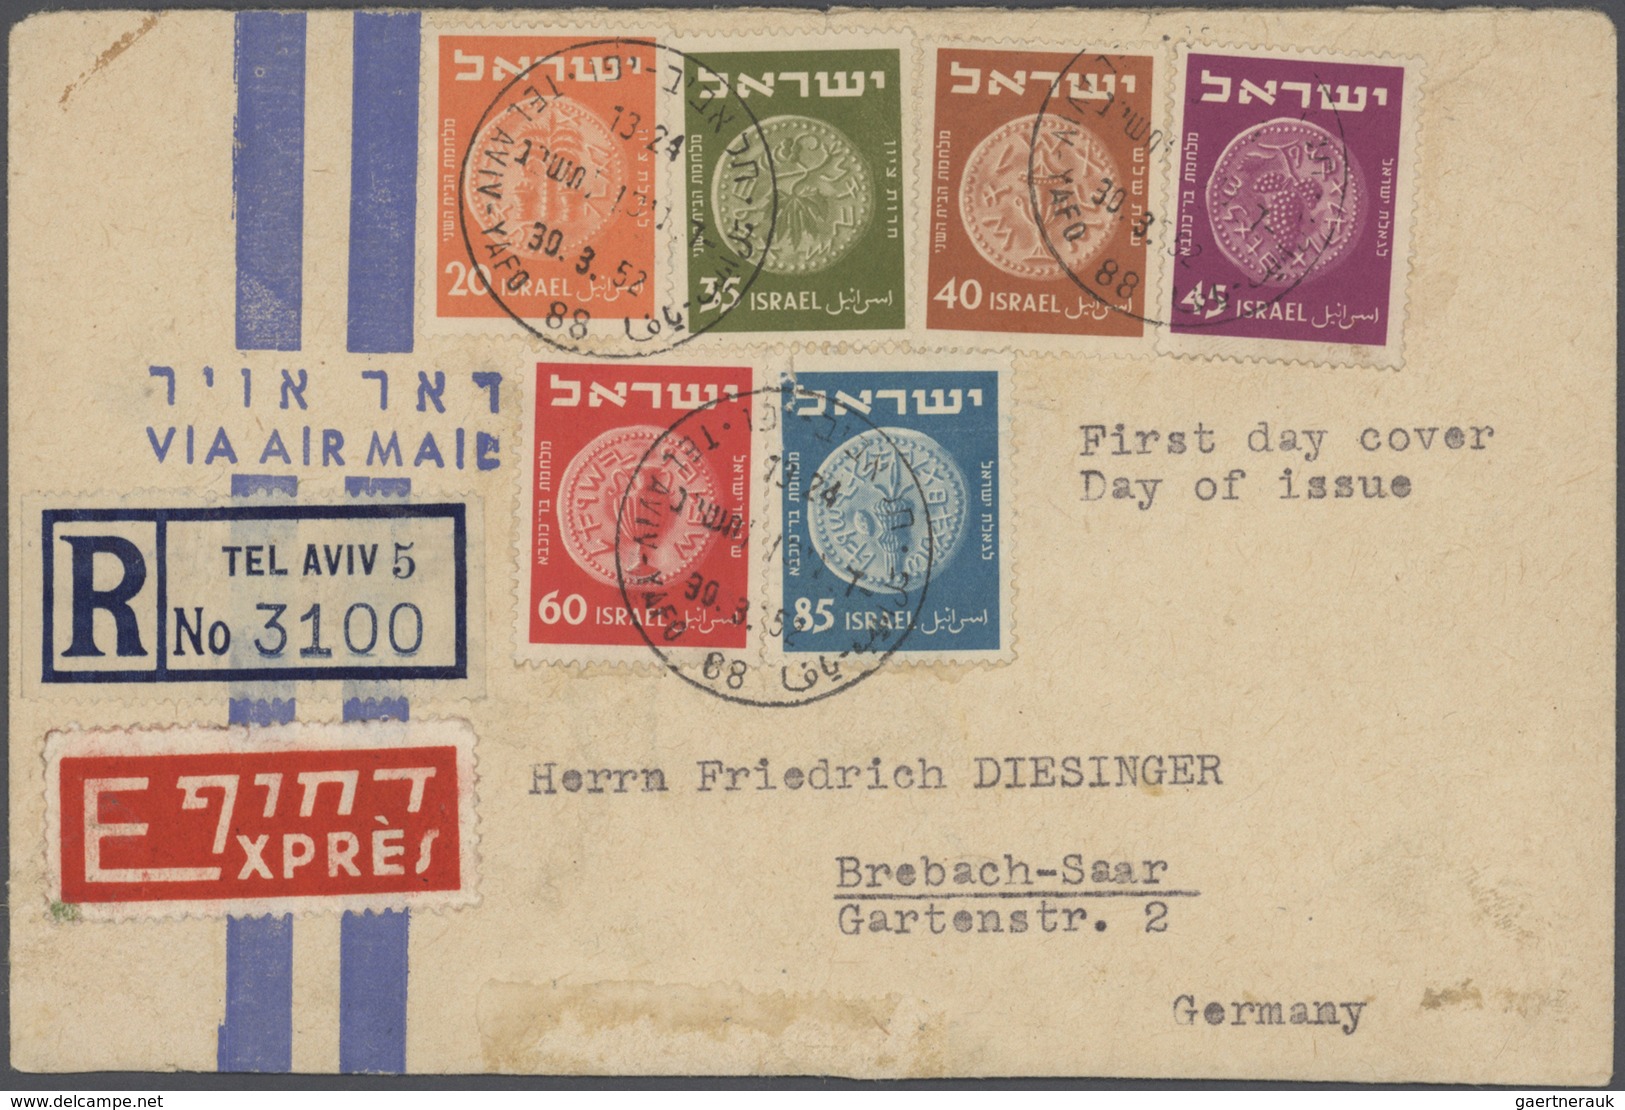 Israel: 1949/1959, holding of apprx 210 covers/cards/used stationeries, comprising commercial and ph